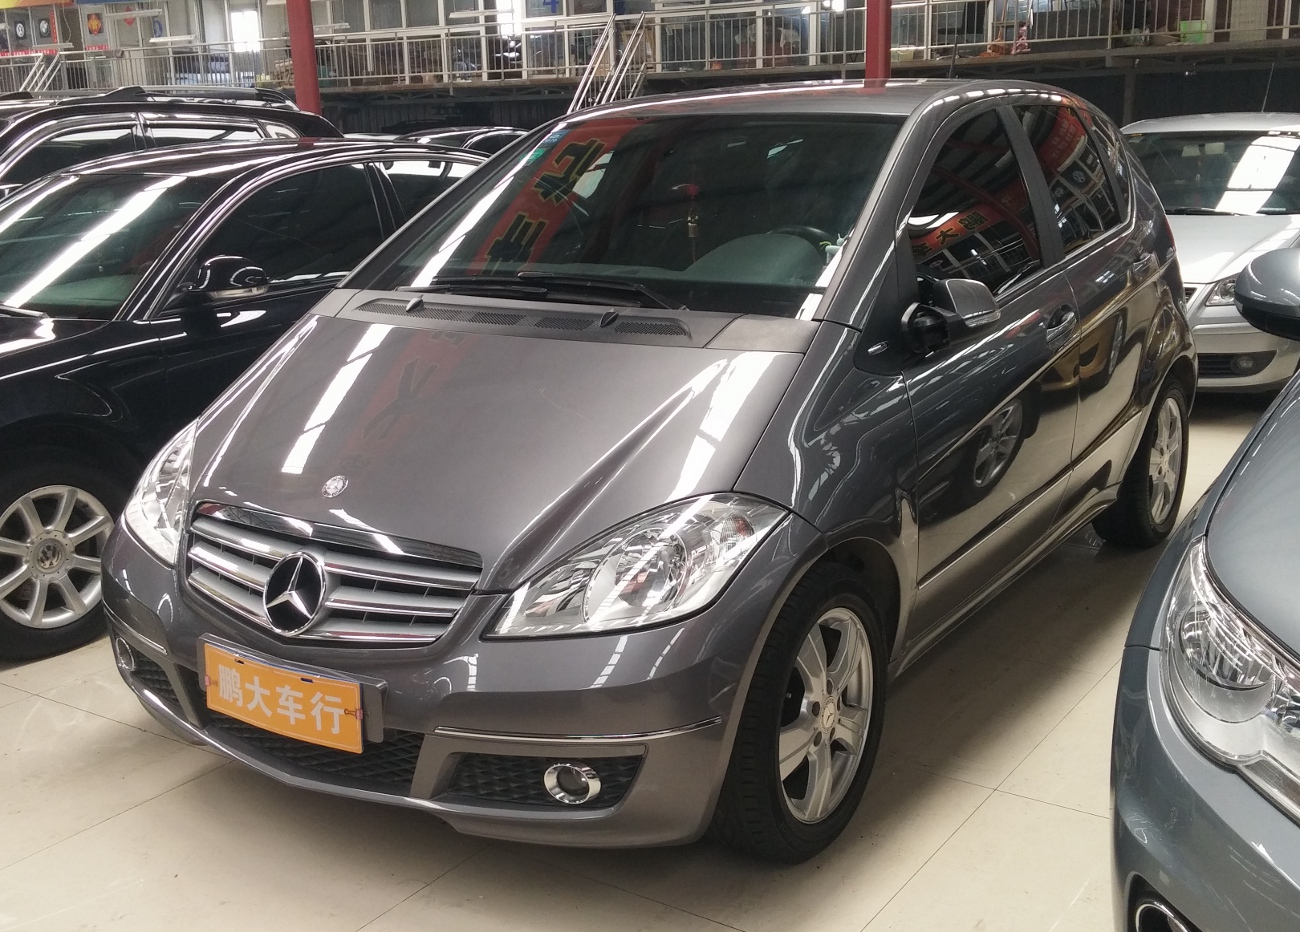 https://upload.wikimedia.org/wikipedia/commons/a/af/Mercedes-Benz_A-Class_W169_facelift_2_China_2015-04-08.jpg